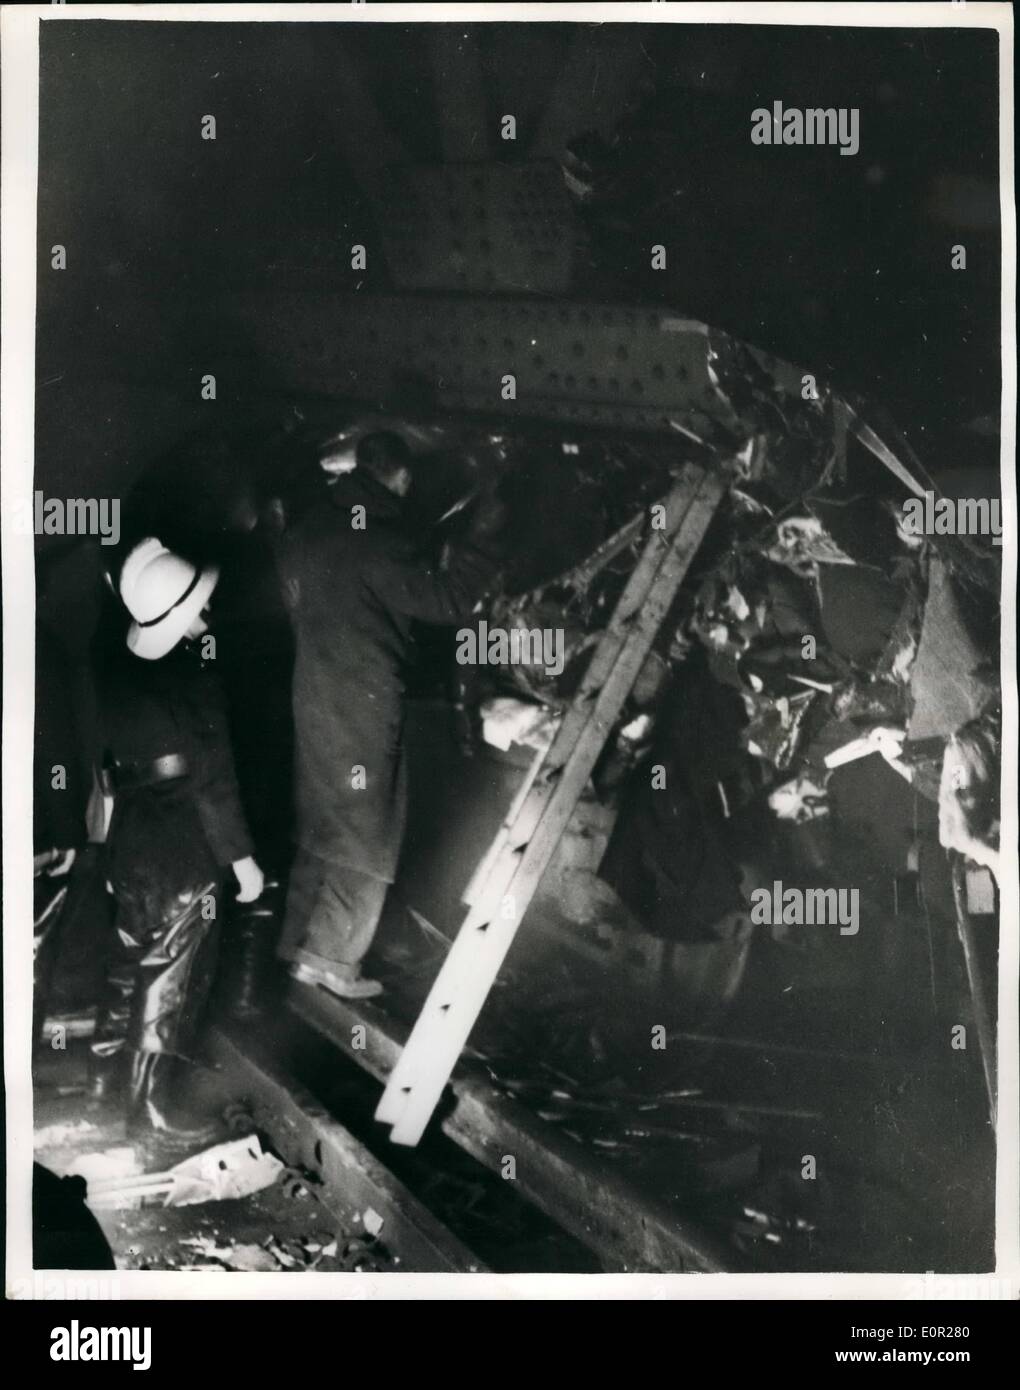 Dec. 12, 1957 - 64 Killed in Lweisham rail disaster; 64 people were killed and 200 injured in last night's rail disaster, when a steam train from Cannon-street to Ramasgate crashed into the stationary Charing Cross to Hayes electric train, just outside St. John's Station, Lewisham. Photo Shows Fireman fight through the tangled wreckage to reach a trapped made last night. Stock Photo